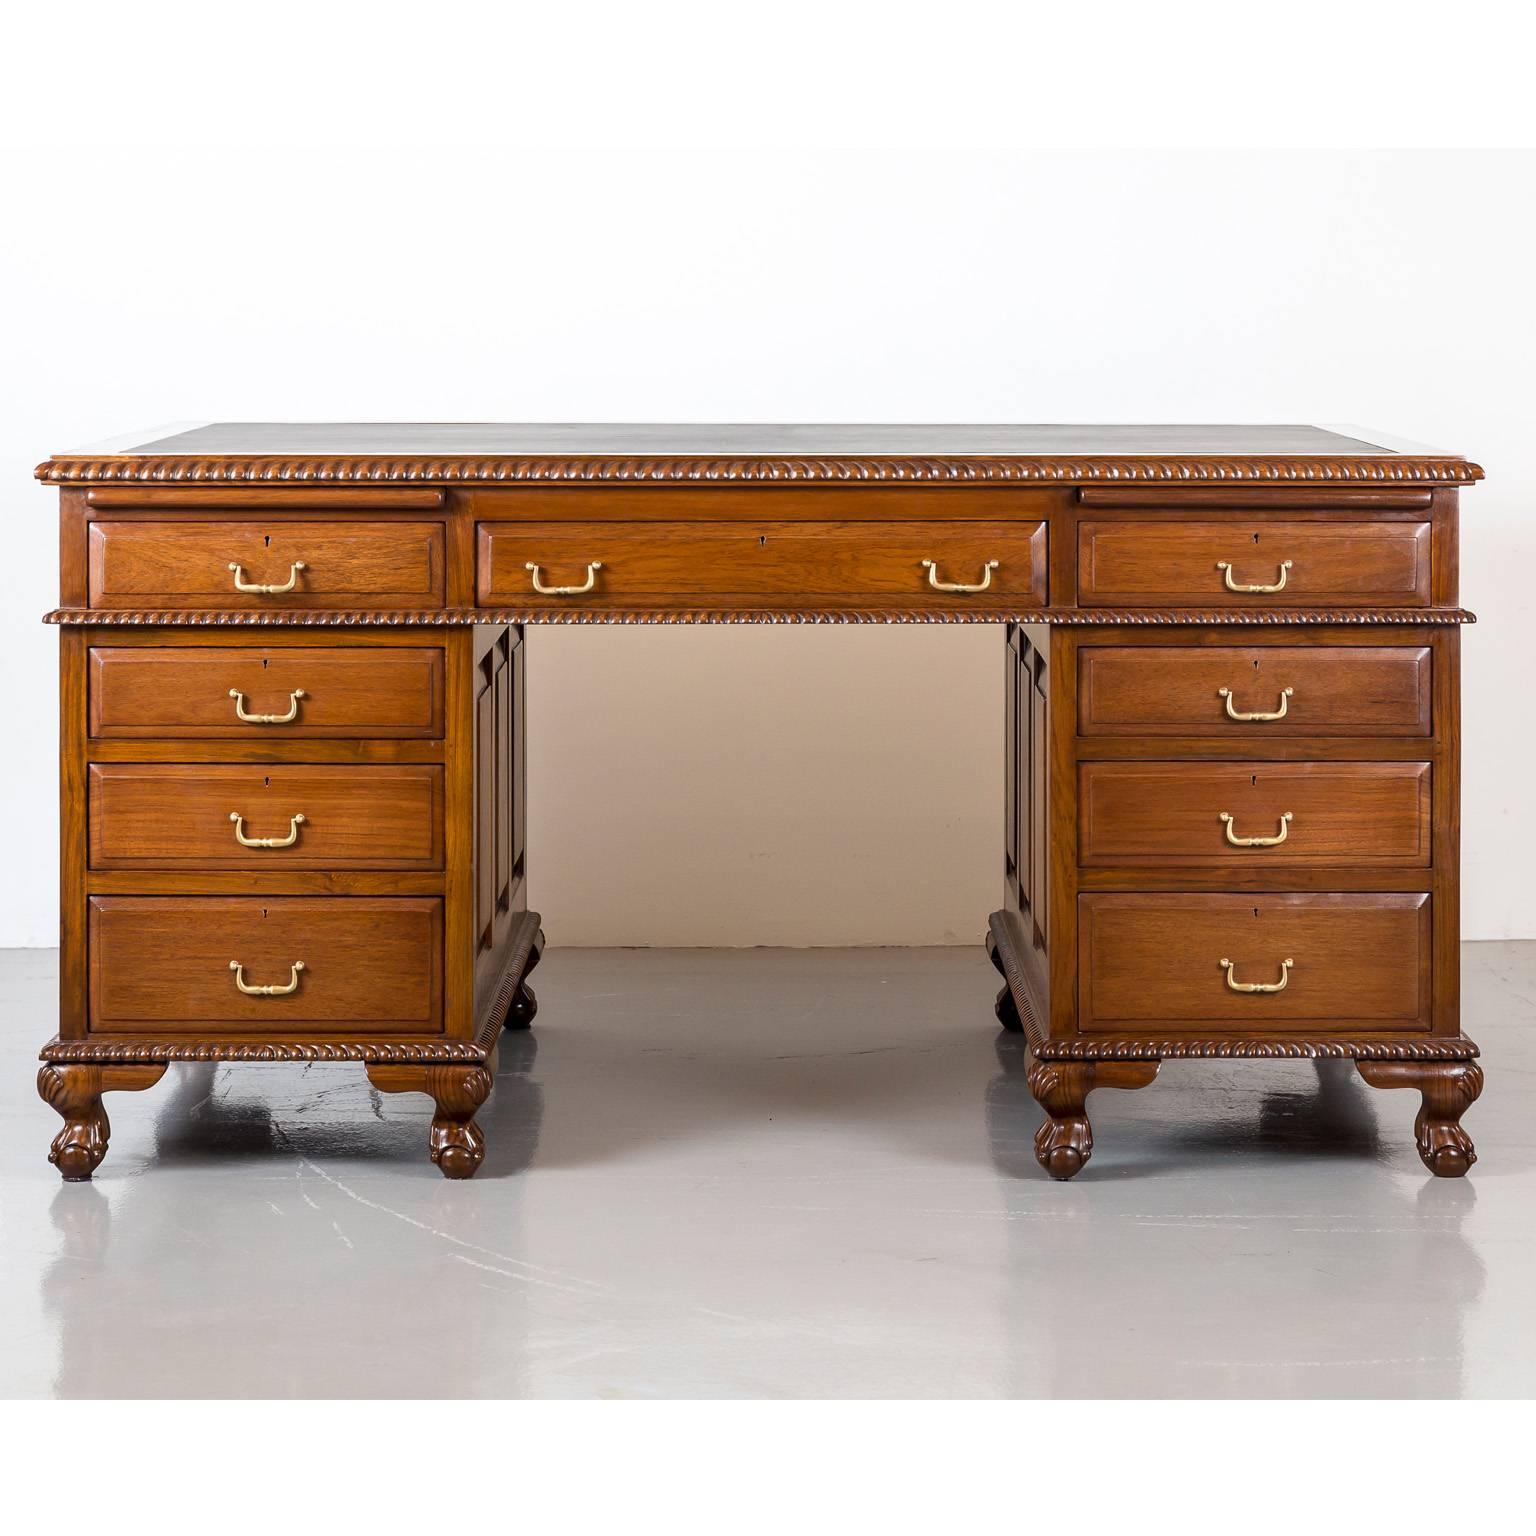 An impressive British Colonial twin pedestal desk in teakwood with a large overhanging top above a central knee hole. The top with a black leather writing surface consists further of a central drawer flanked by two smaller ones. Each pedestal has